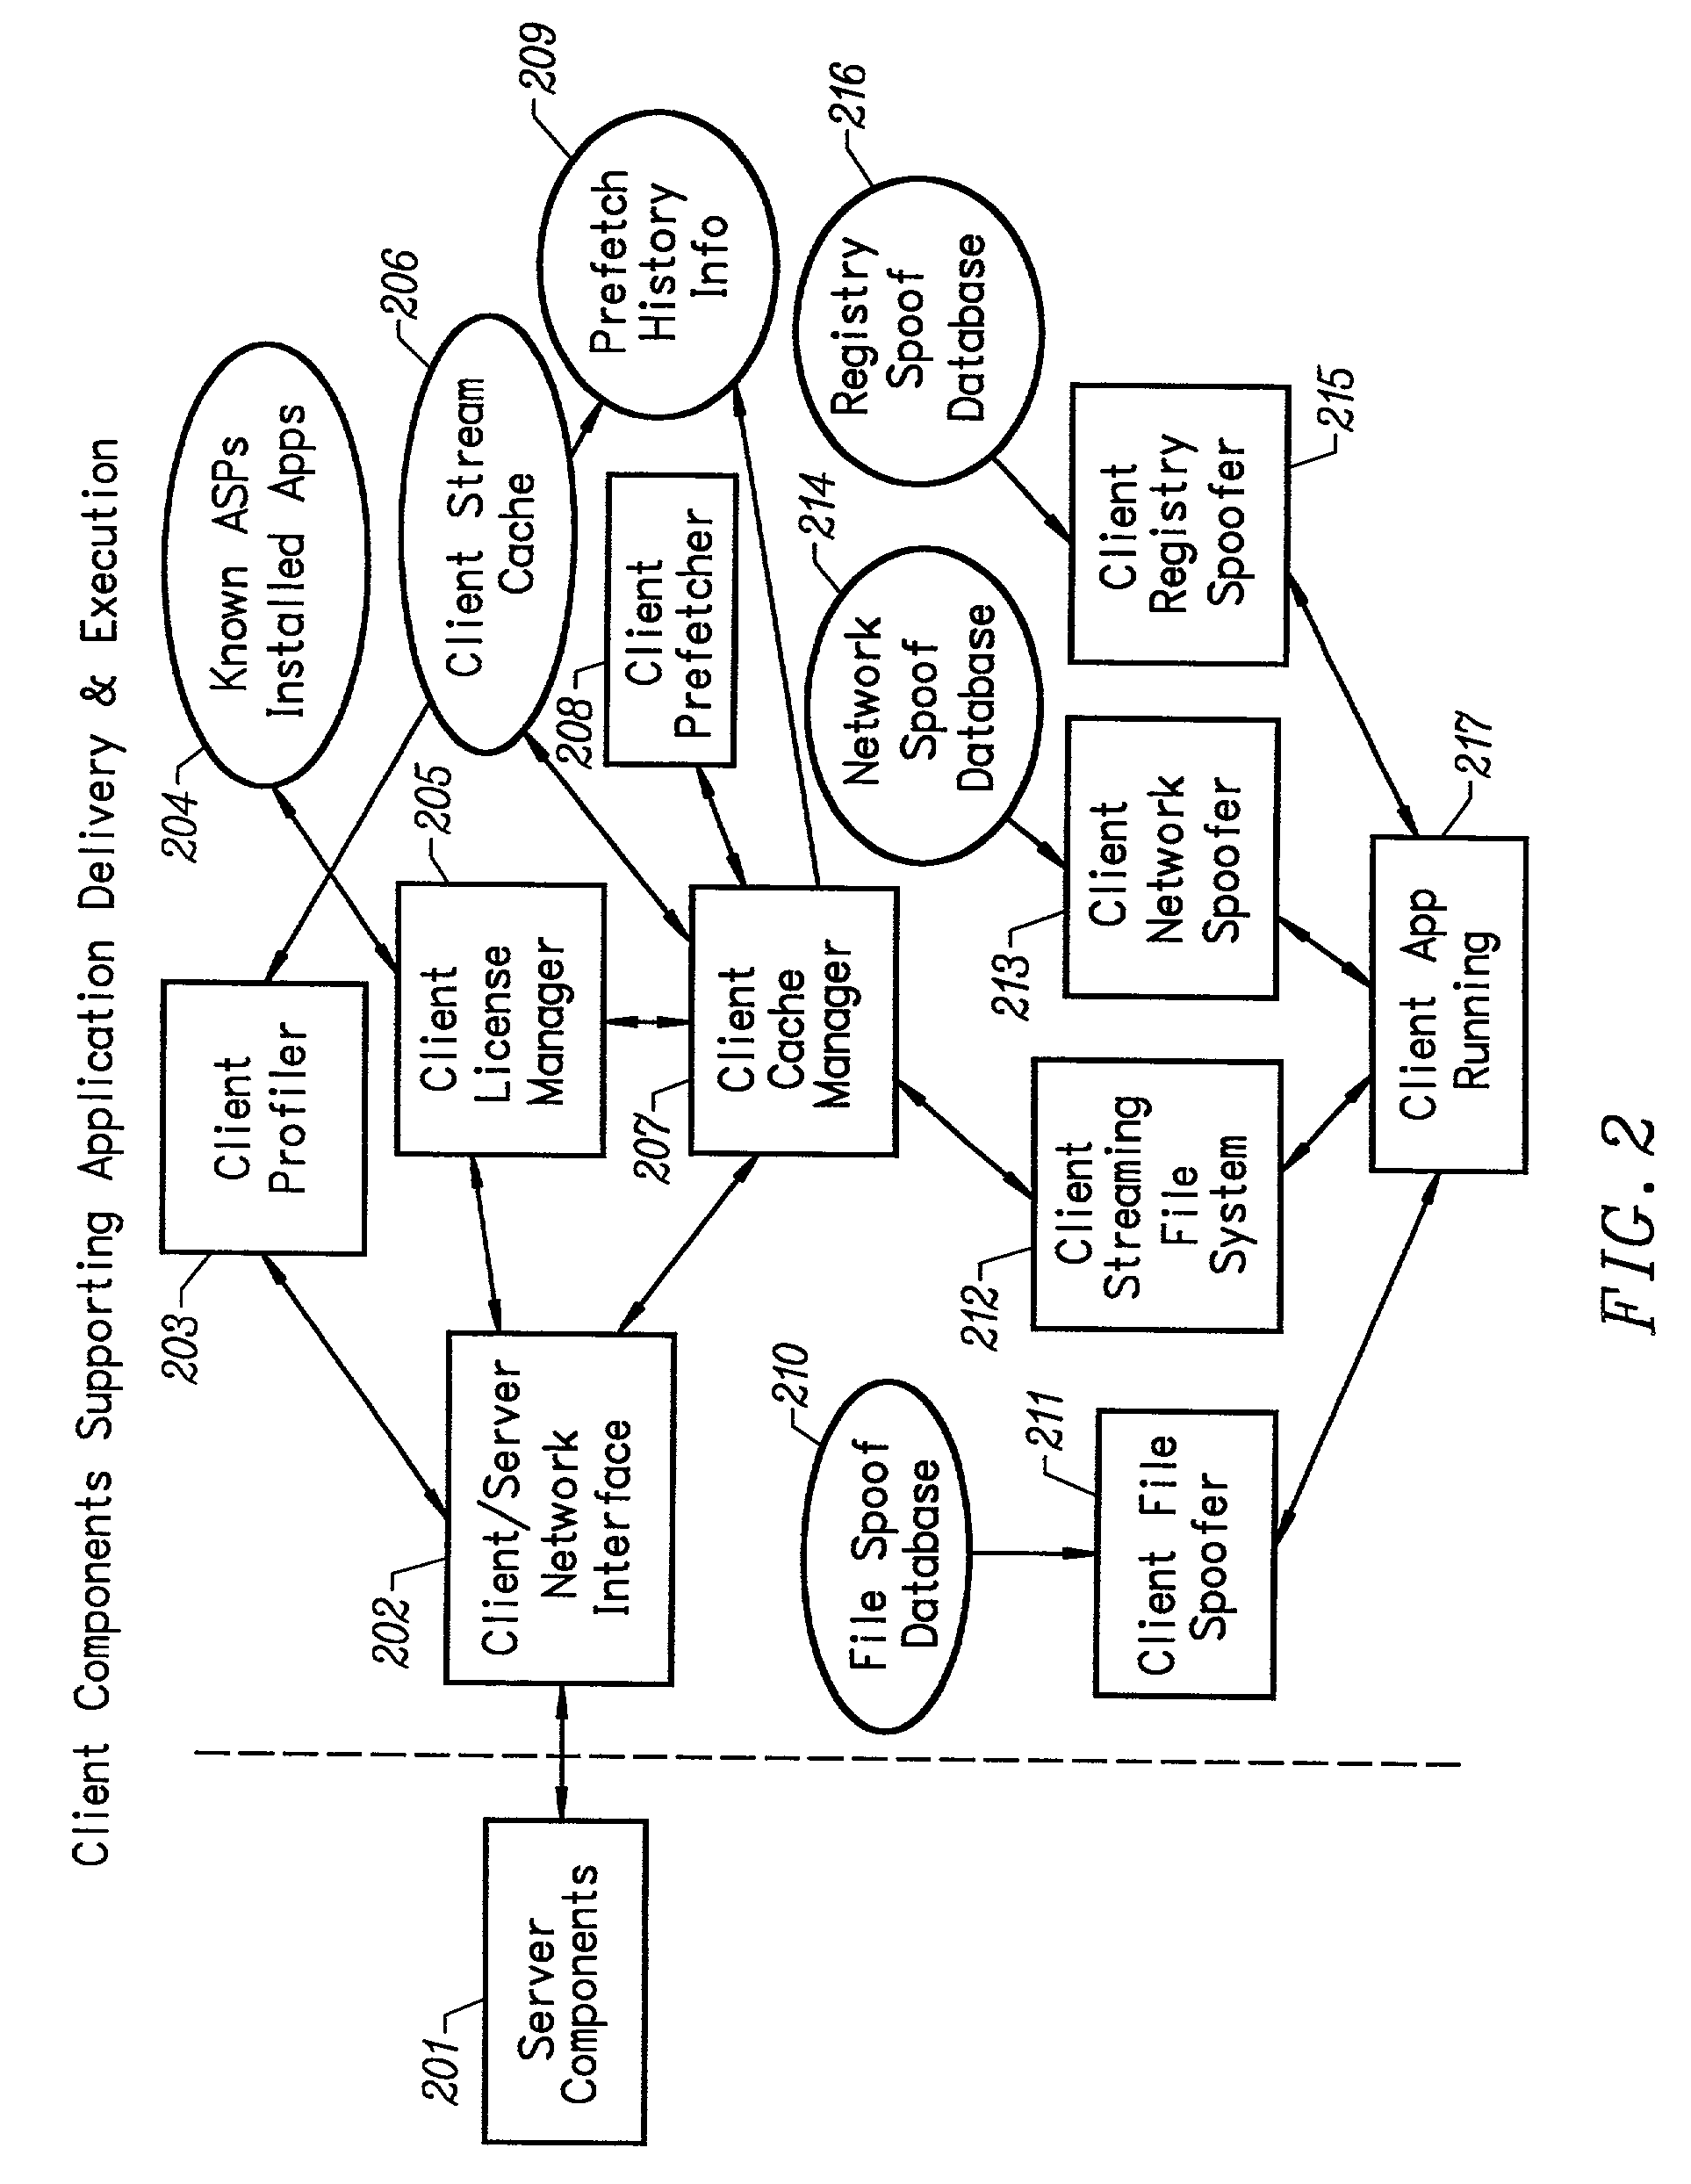 Network caching system for streamed applications